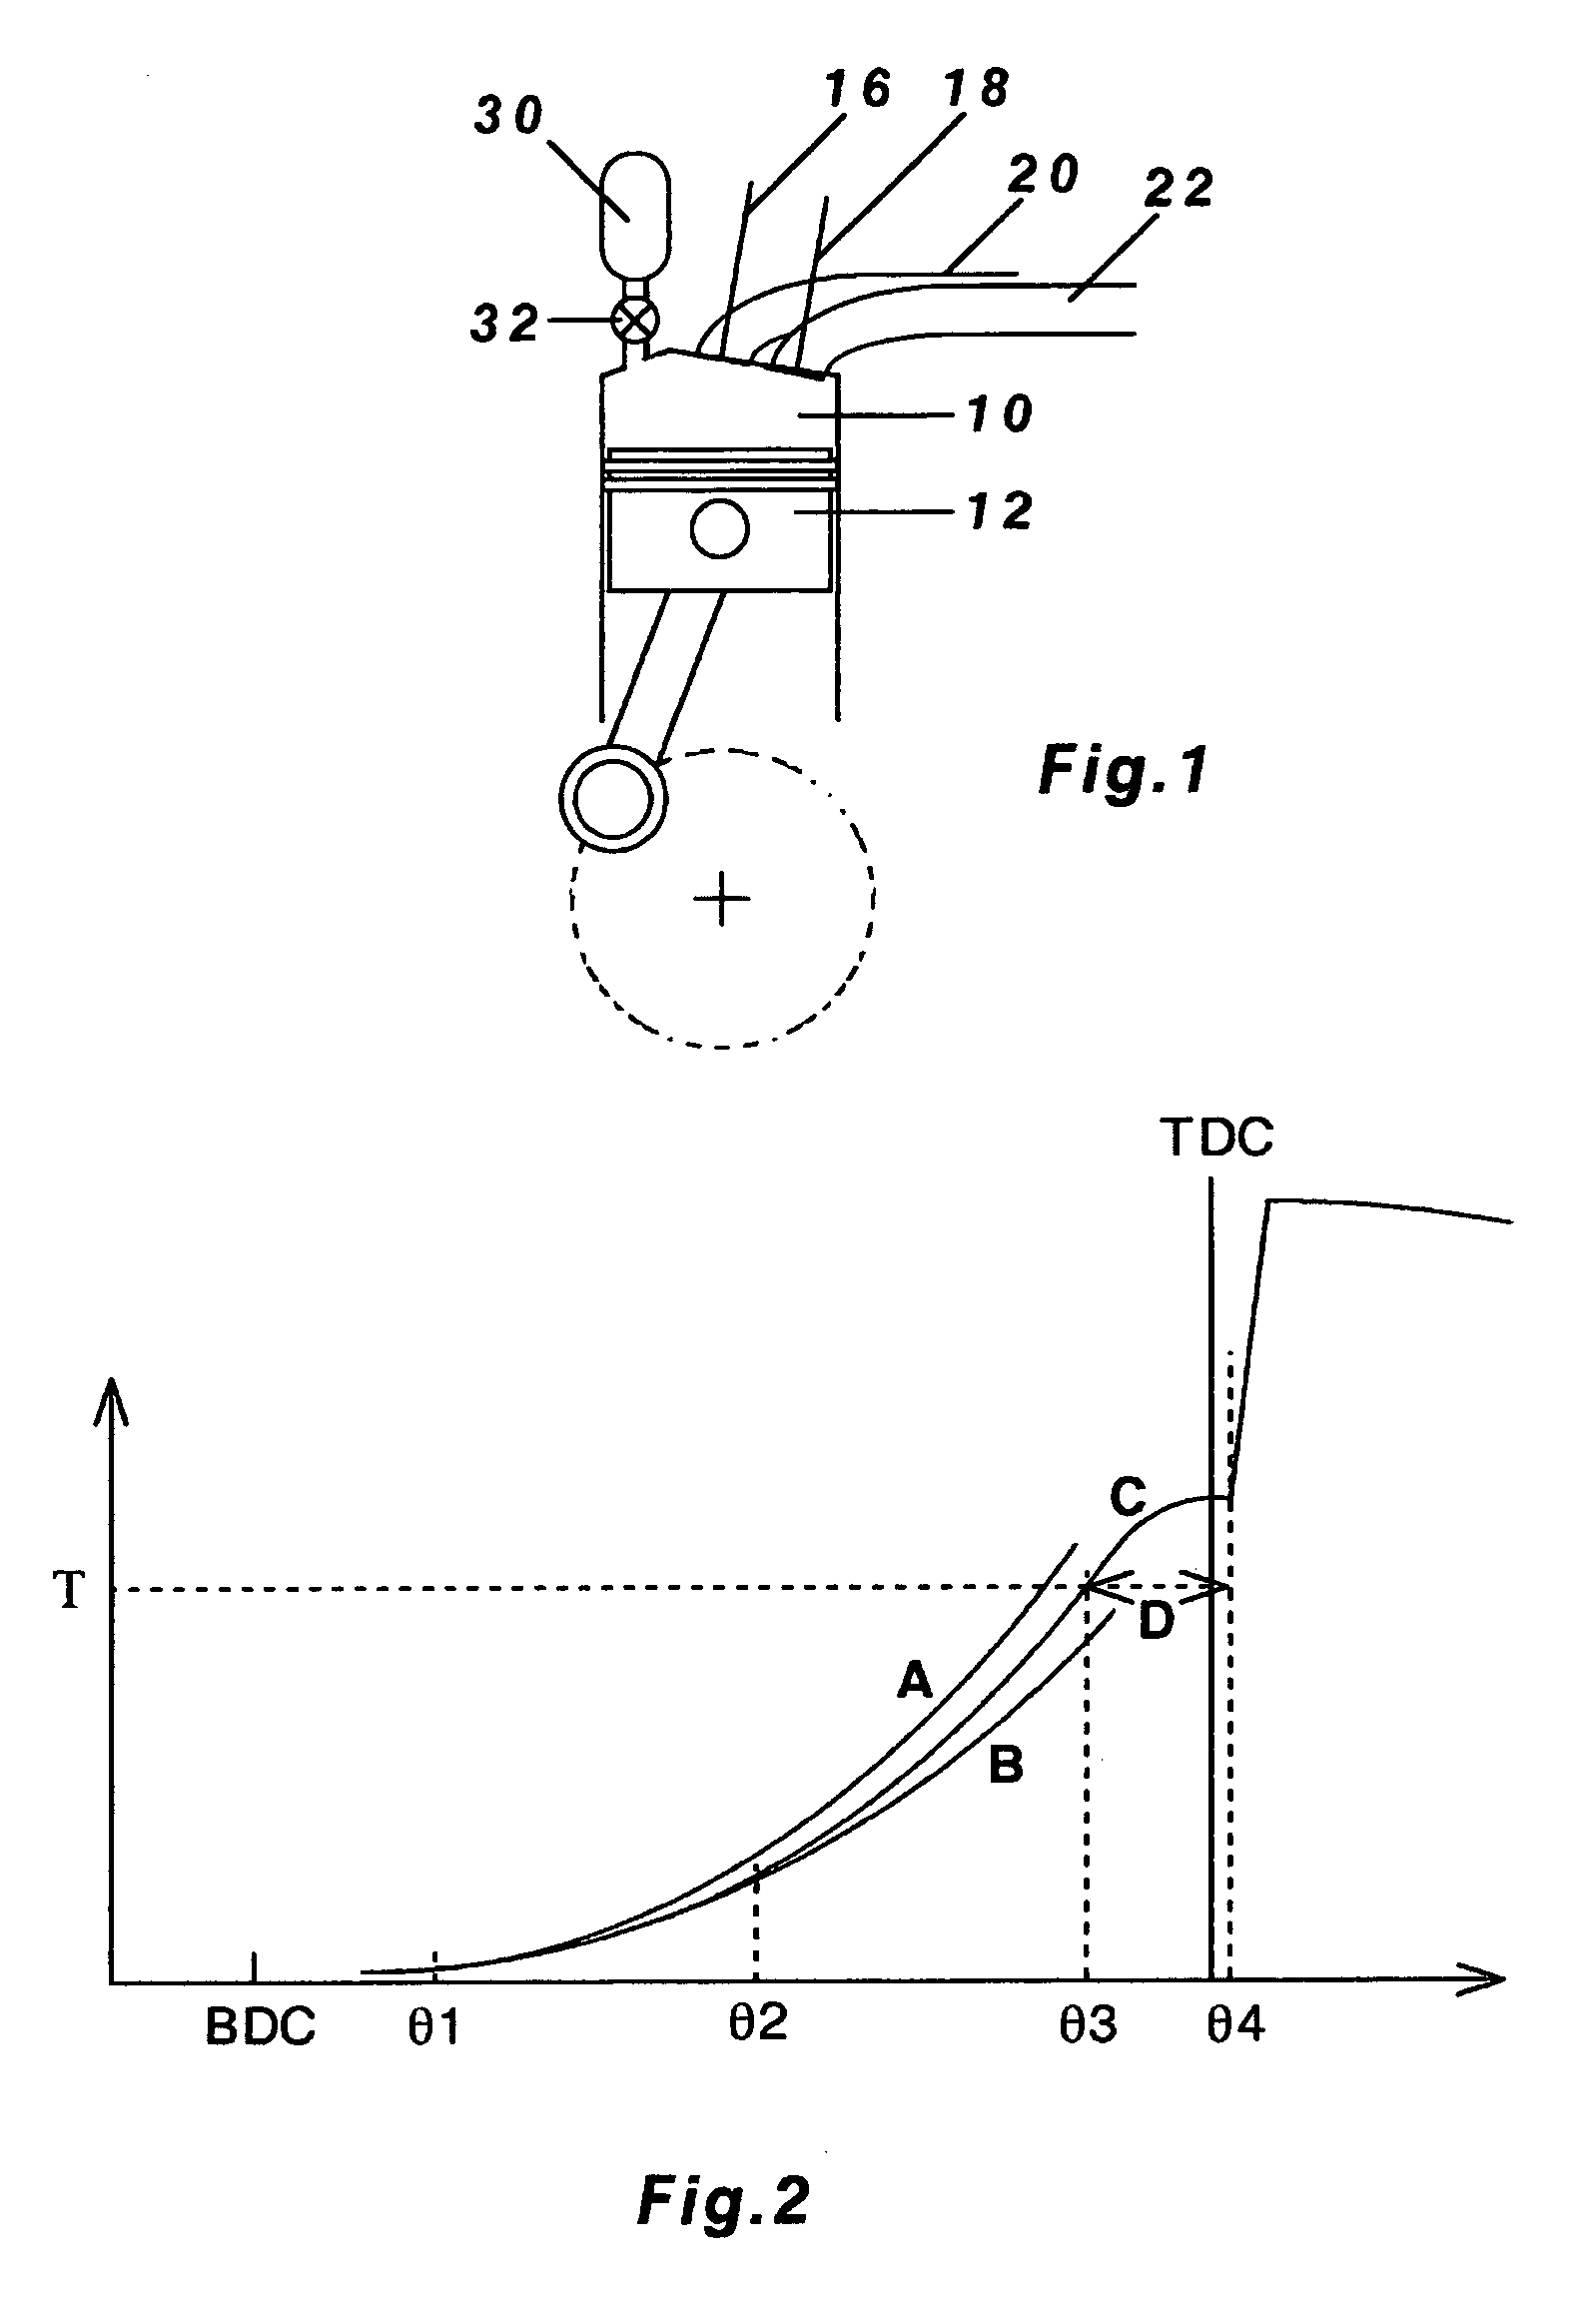 Auto-ignition timing control and calibration method